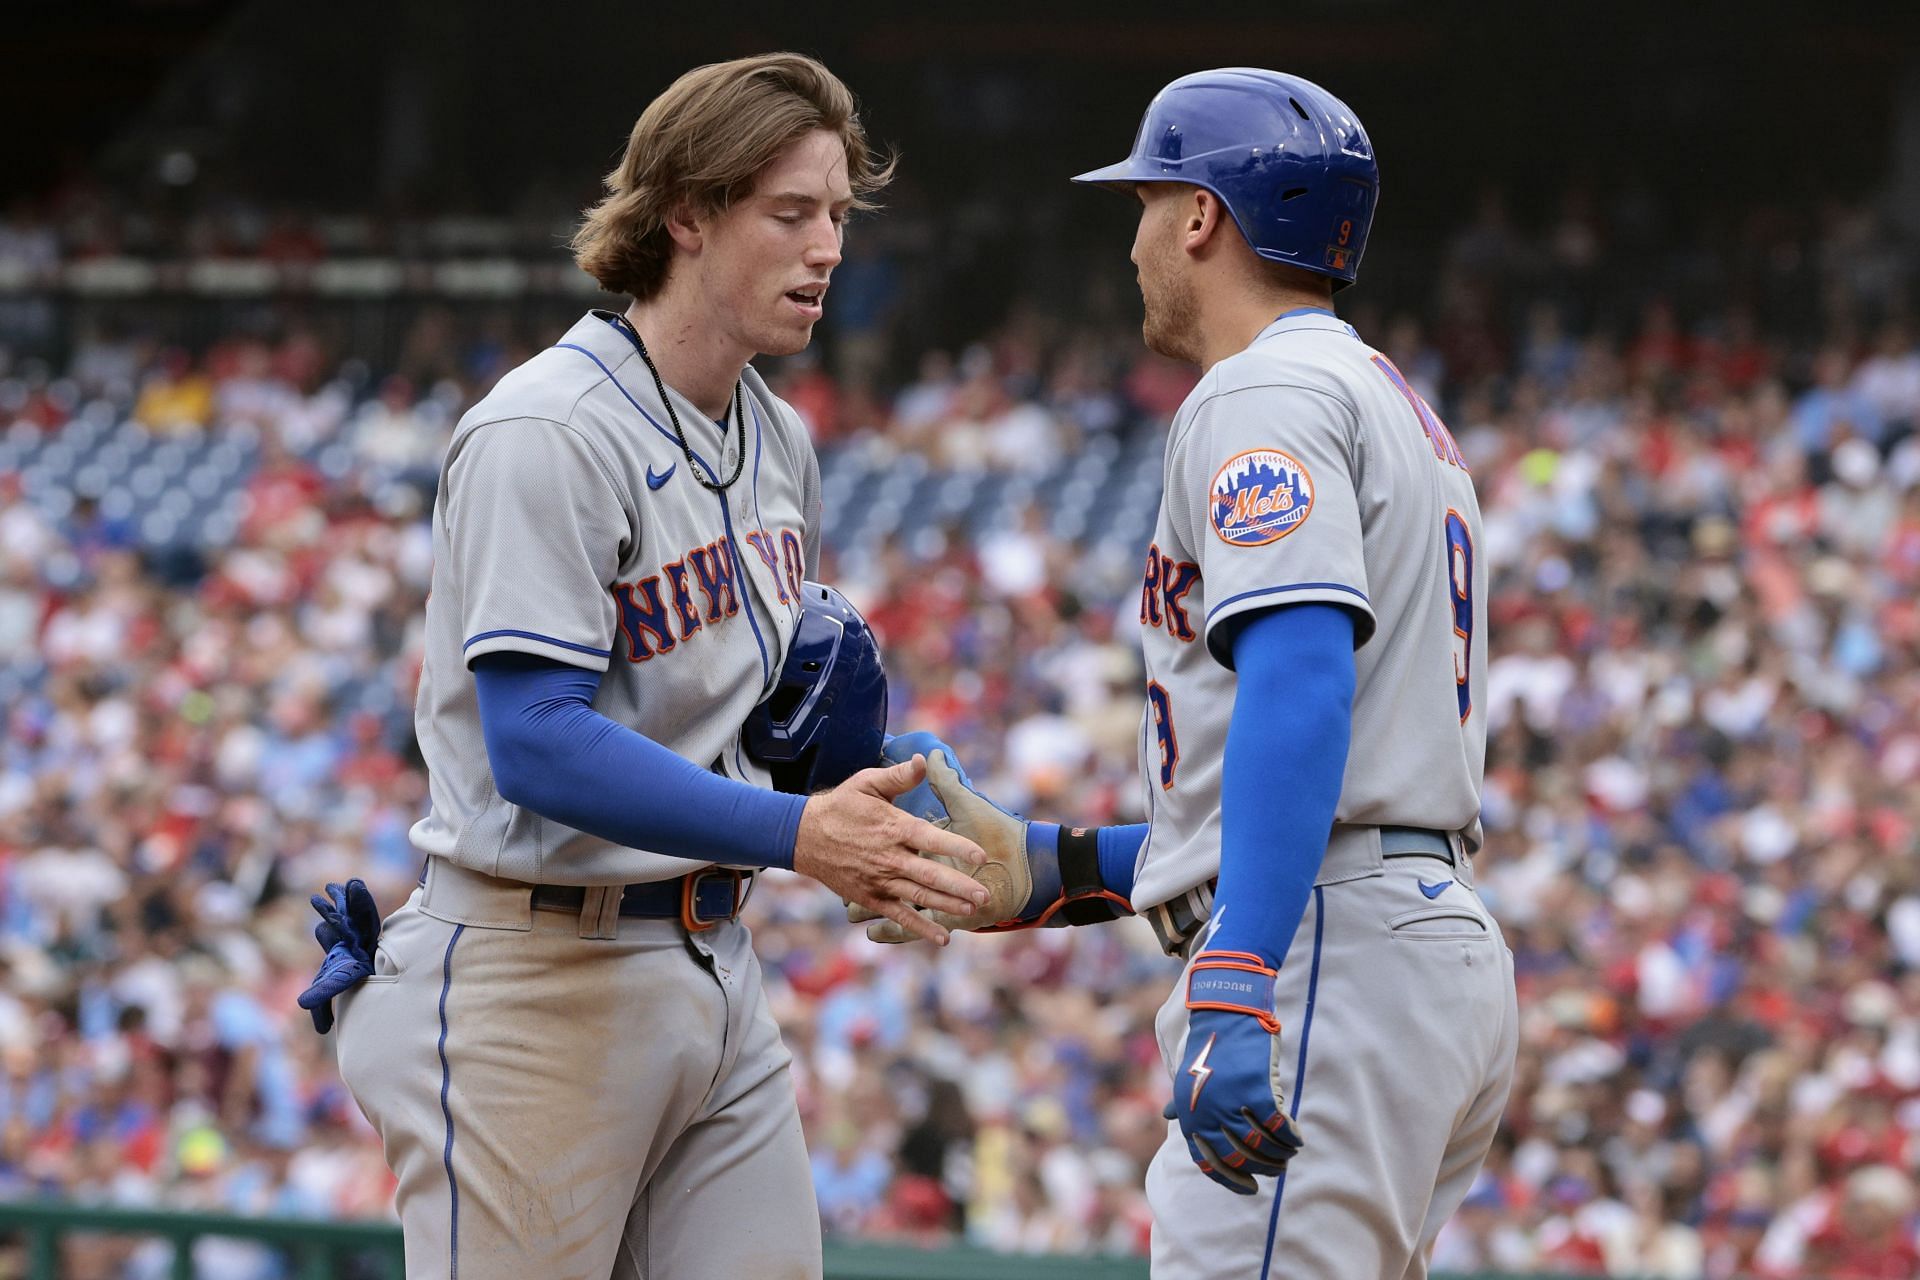 Brett Baty #22 of the New York Mets is congratulated by Brandon Nimmo